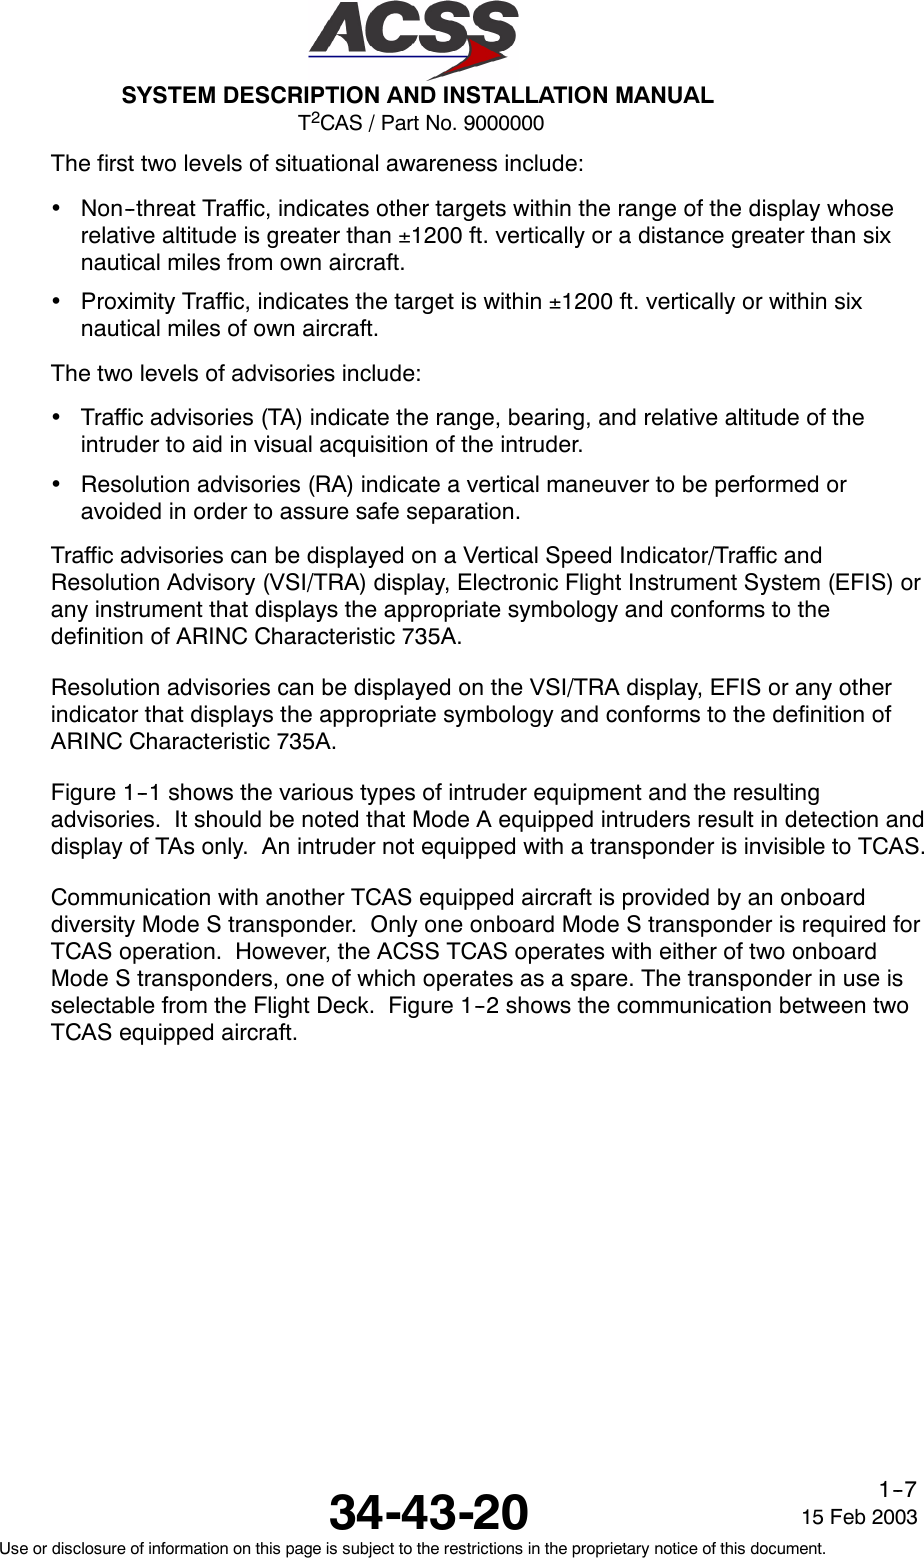 T2CAS / Part No. 9000000SYSTEM DESCRIPTION AND INSTALLATION MANUAL34-43-20 15 Feb 2003Use or disclosure of information on this page is subject to the restrictions in the proprietary notice of this document.1--7The first two levels of situational awareness include:•Non--threat Traffic, indicates other targets within the range of the display whoserelative altitude is greater than ±1200 ft. vertically or a distance greater than sixnautical miles from own aircraft.•Proximity Traffic, indicates the target is within ±1200 ft. vertically or within sixnautical miles of own aircraft.The two levels of advisories include:•Traffic advisories (TA) indicate the range, bearing, and relative altitude of theintruder to aid in visual acquisition of the intruder.•Resolution advisories (RA) indicate a vertical maneuver to be performed oravoided in order to assure safe separation.Traffic advisories can be displayed on a Vertical Speed Indicator/Traffic andResolution Advisory (VSI/TRA) display, Electronic Flight Instrument System (EFIS) orany instrument that displays the appropriate symbology and conforms to thedefinition of ARINC Characteristic 735A.Resolution advisories can be displayed on the VSI/TRA display, EFIS or any otherindicator that displays the appropriate symbology and conforms to the definition ofARINC Characteristic 735A.Figure 1--1 shows the various types of intruder equipment and the resultingadvisories. It should be noted that Mode A equipped intruders result in detection anddisplay of TAs only. An intruder not equipped with a transponder is invisible to TCAS.Communication with another TCAS equipped aircraft is provided by an onboarddiversity Mode S transponder. Only one onboard Mode S transponder is required forTCAS operation. However, the ACSS TCAS operates with either of two onboardMode S transponders, one of which operates as a spare. The transponder in use isselectable from the Flight Deck. Figure 1--2 shows the communication between twoTCAS equipped aircraft.